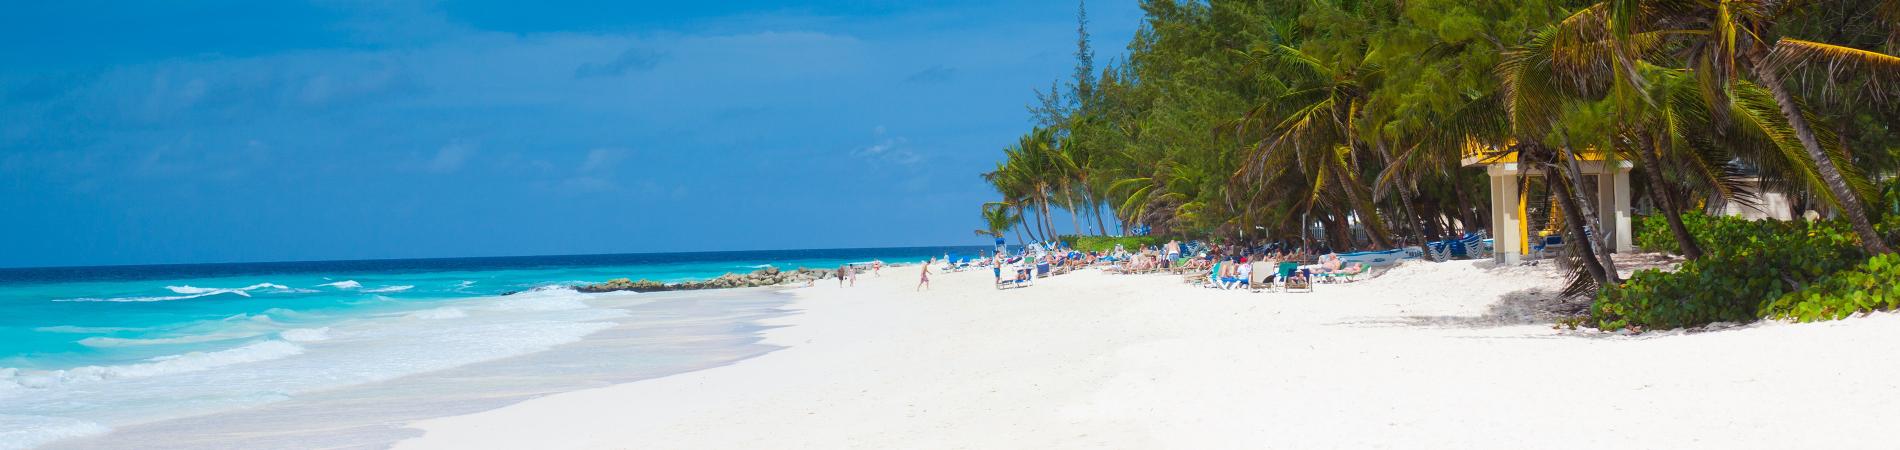 Image for The best beaches in Barbados